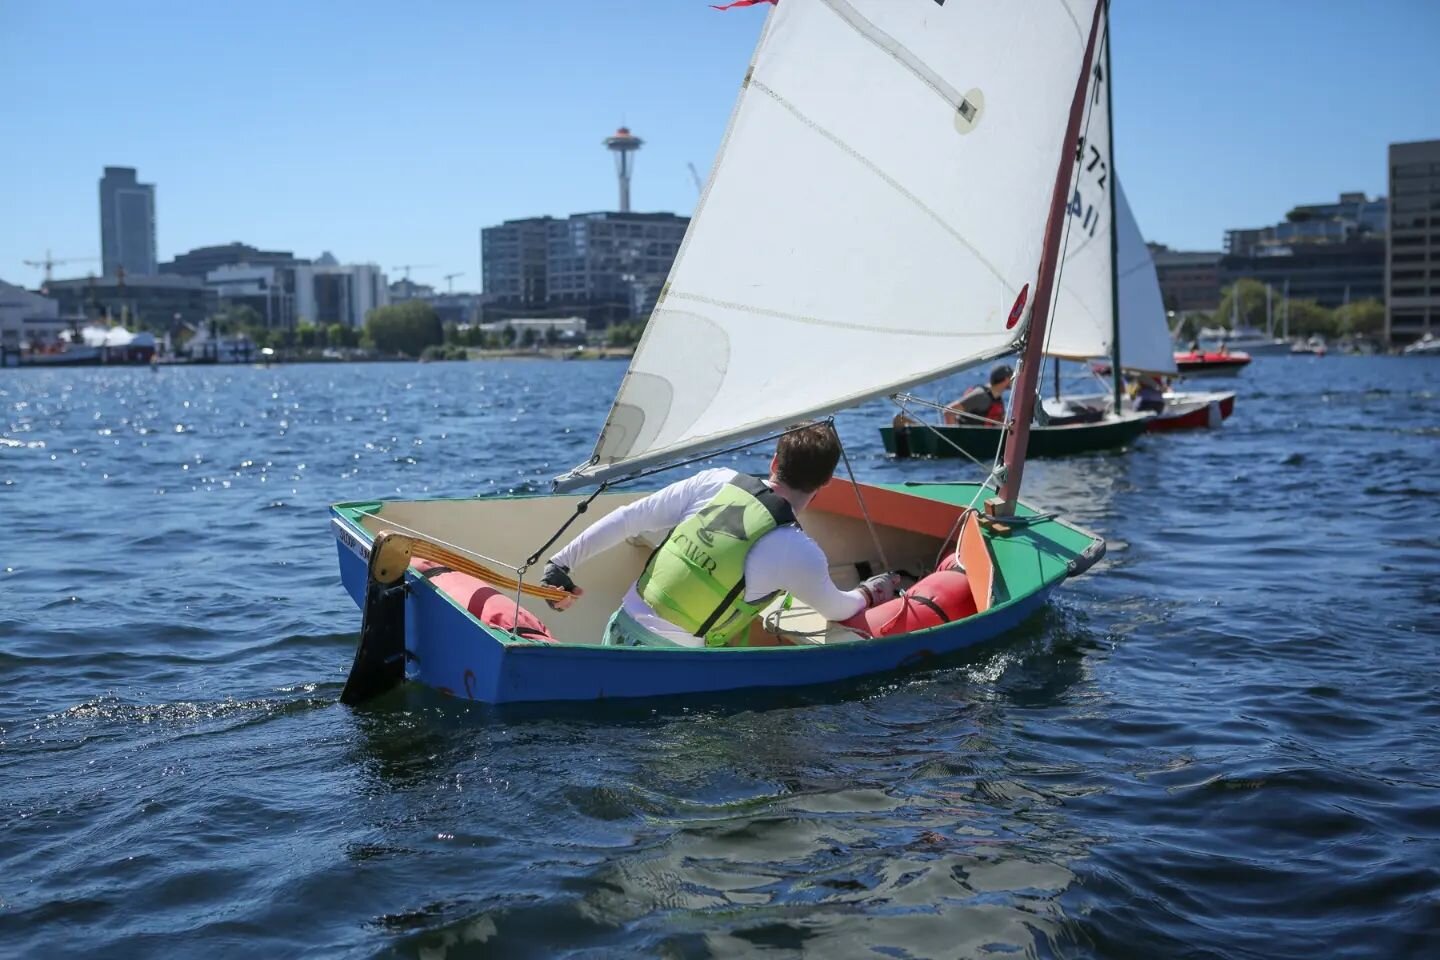 A great, albeit lighter-air, weekend of racing on Lake Union at our El Toro Regatta this year! 26 racers came out to compete in their own vessels or CWB boats for two good days of friendly competition. Thank you racers, volunteers, and race committee